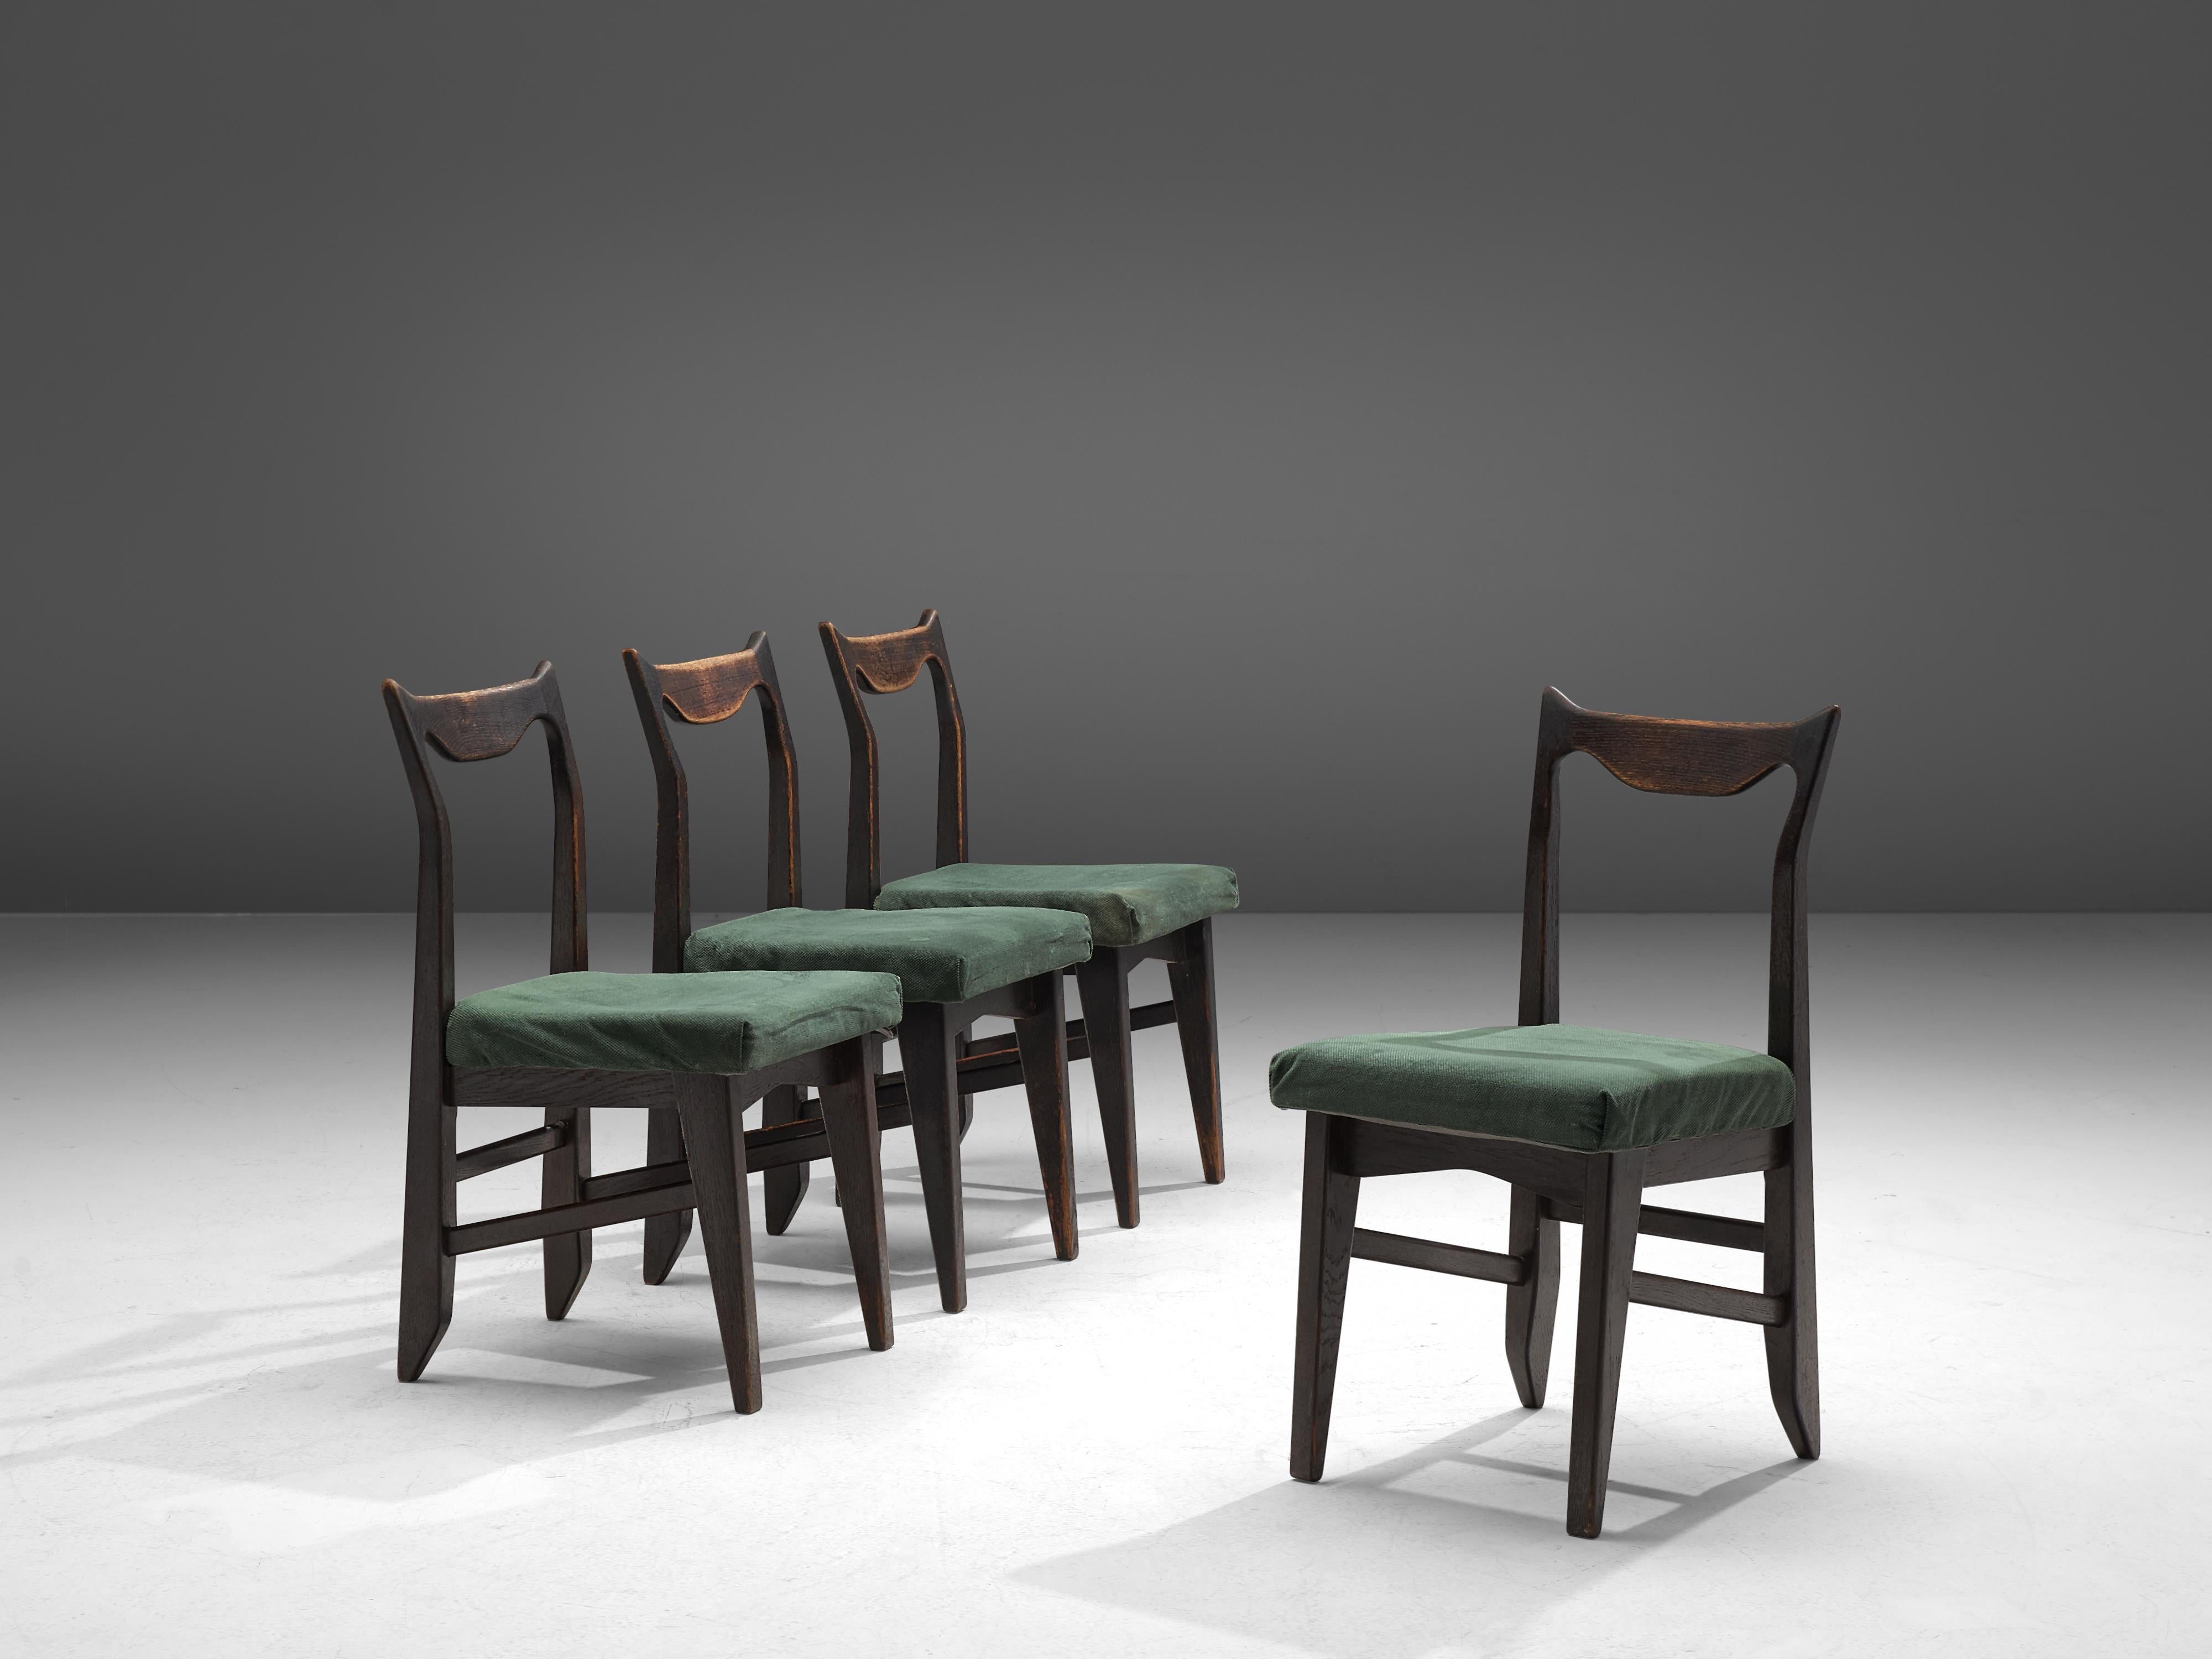 Guillerme et Chambron, set of 4 dining chairs 'Marie Claire', darkened oak and fabric, France, 1960.

Set of four darkened, solid oak dining chairs by Guillerme and Chambron. These chairs show the characteristic frame of this French designer duo.